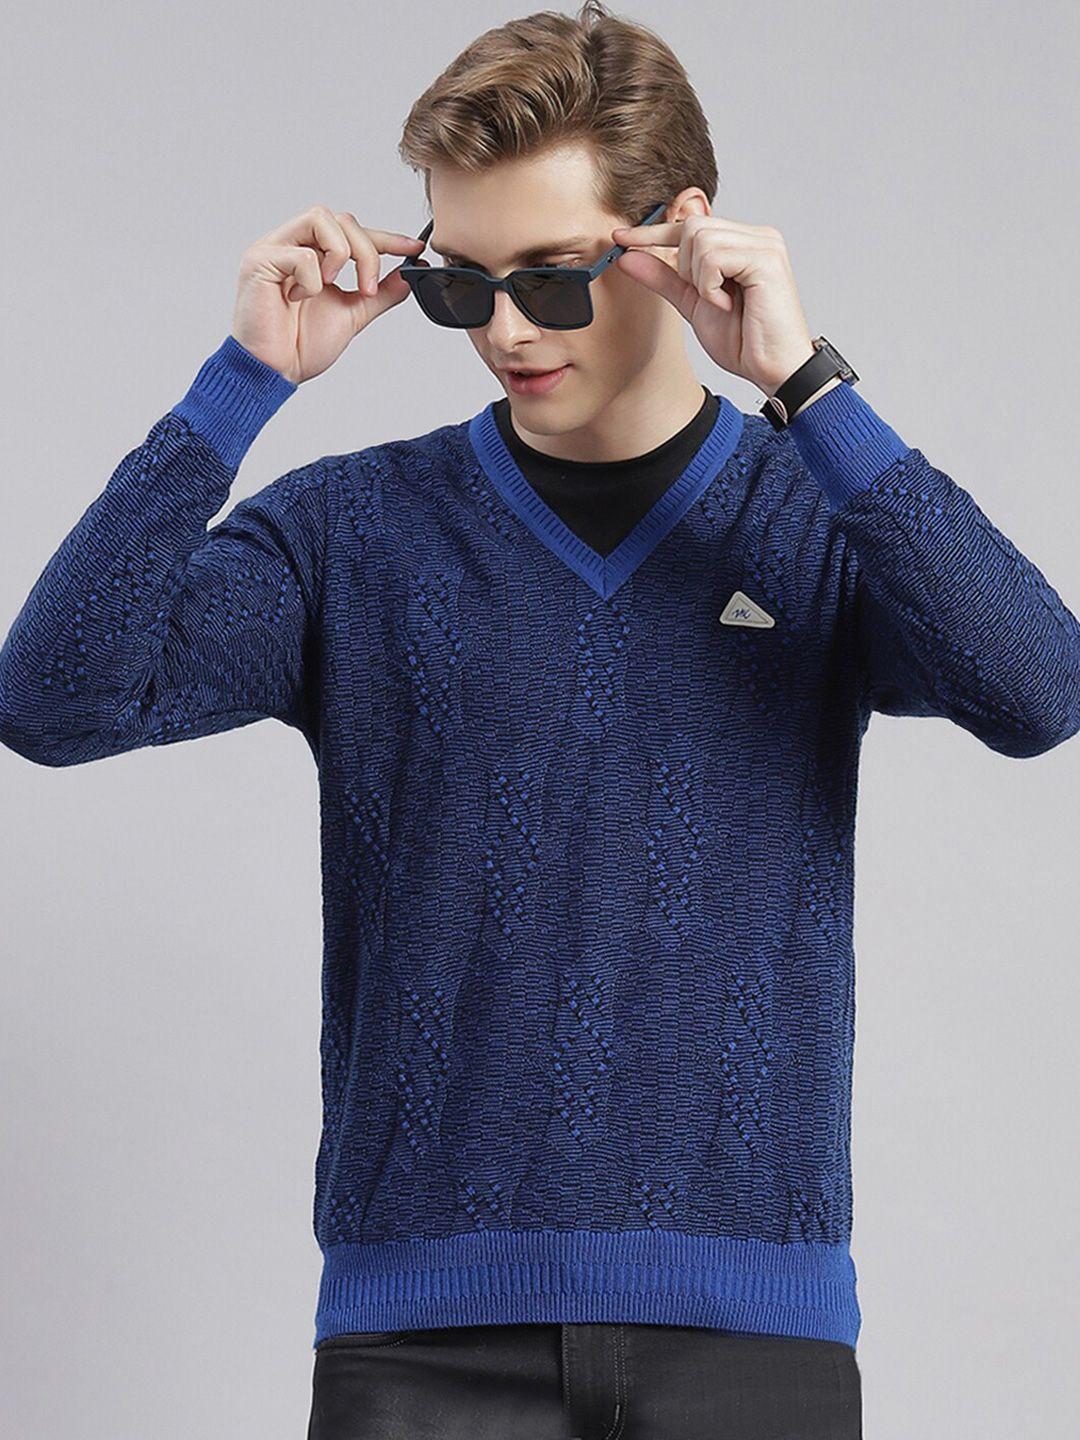 monte-carlo-men-blue-cable-knit-woollen-pullover